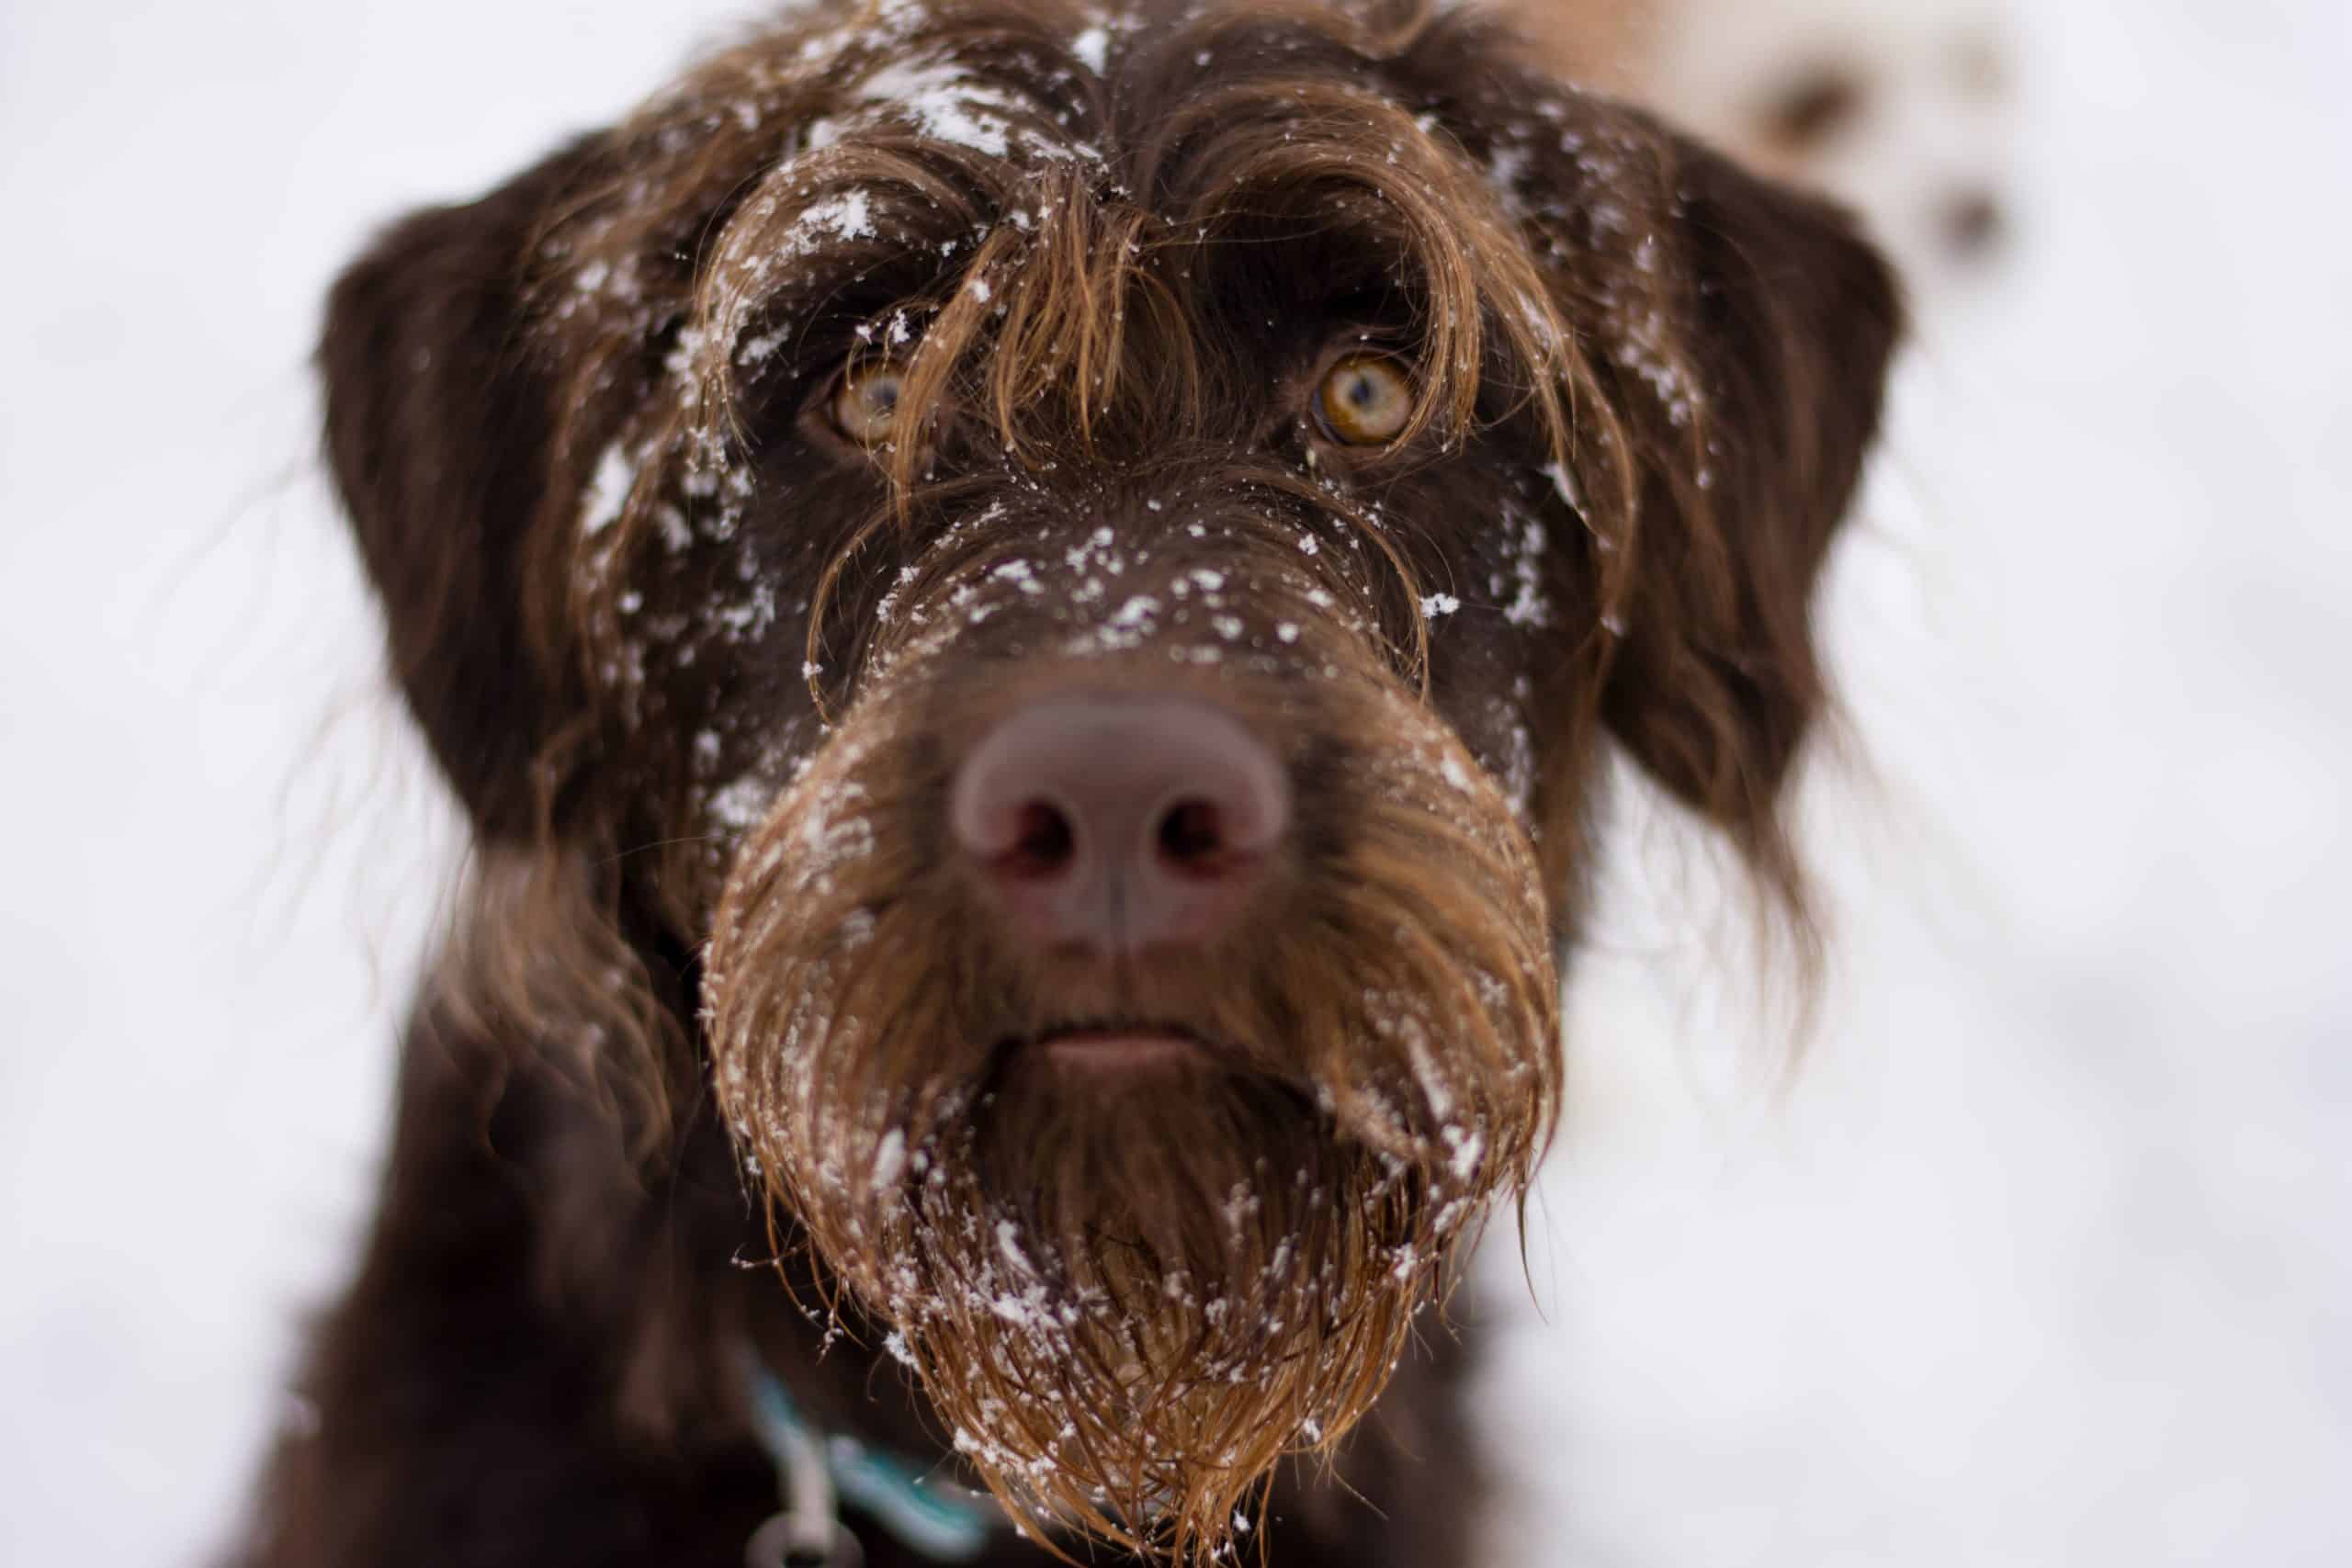 Labradoodle poses with a snow-covered face. To provide Labradoodle winter care to protect your dog from the cold, keep its coat clean and healthy, and use a sweater and boots.